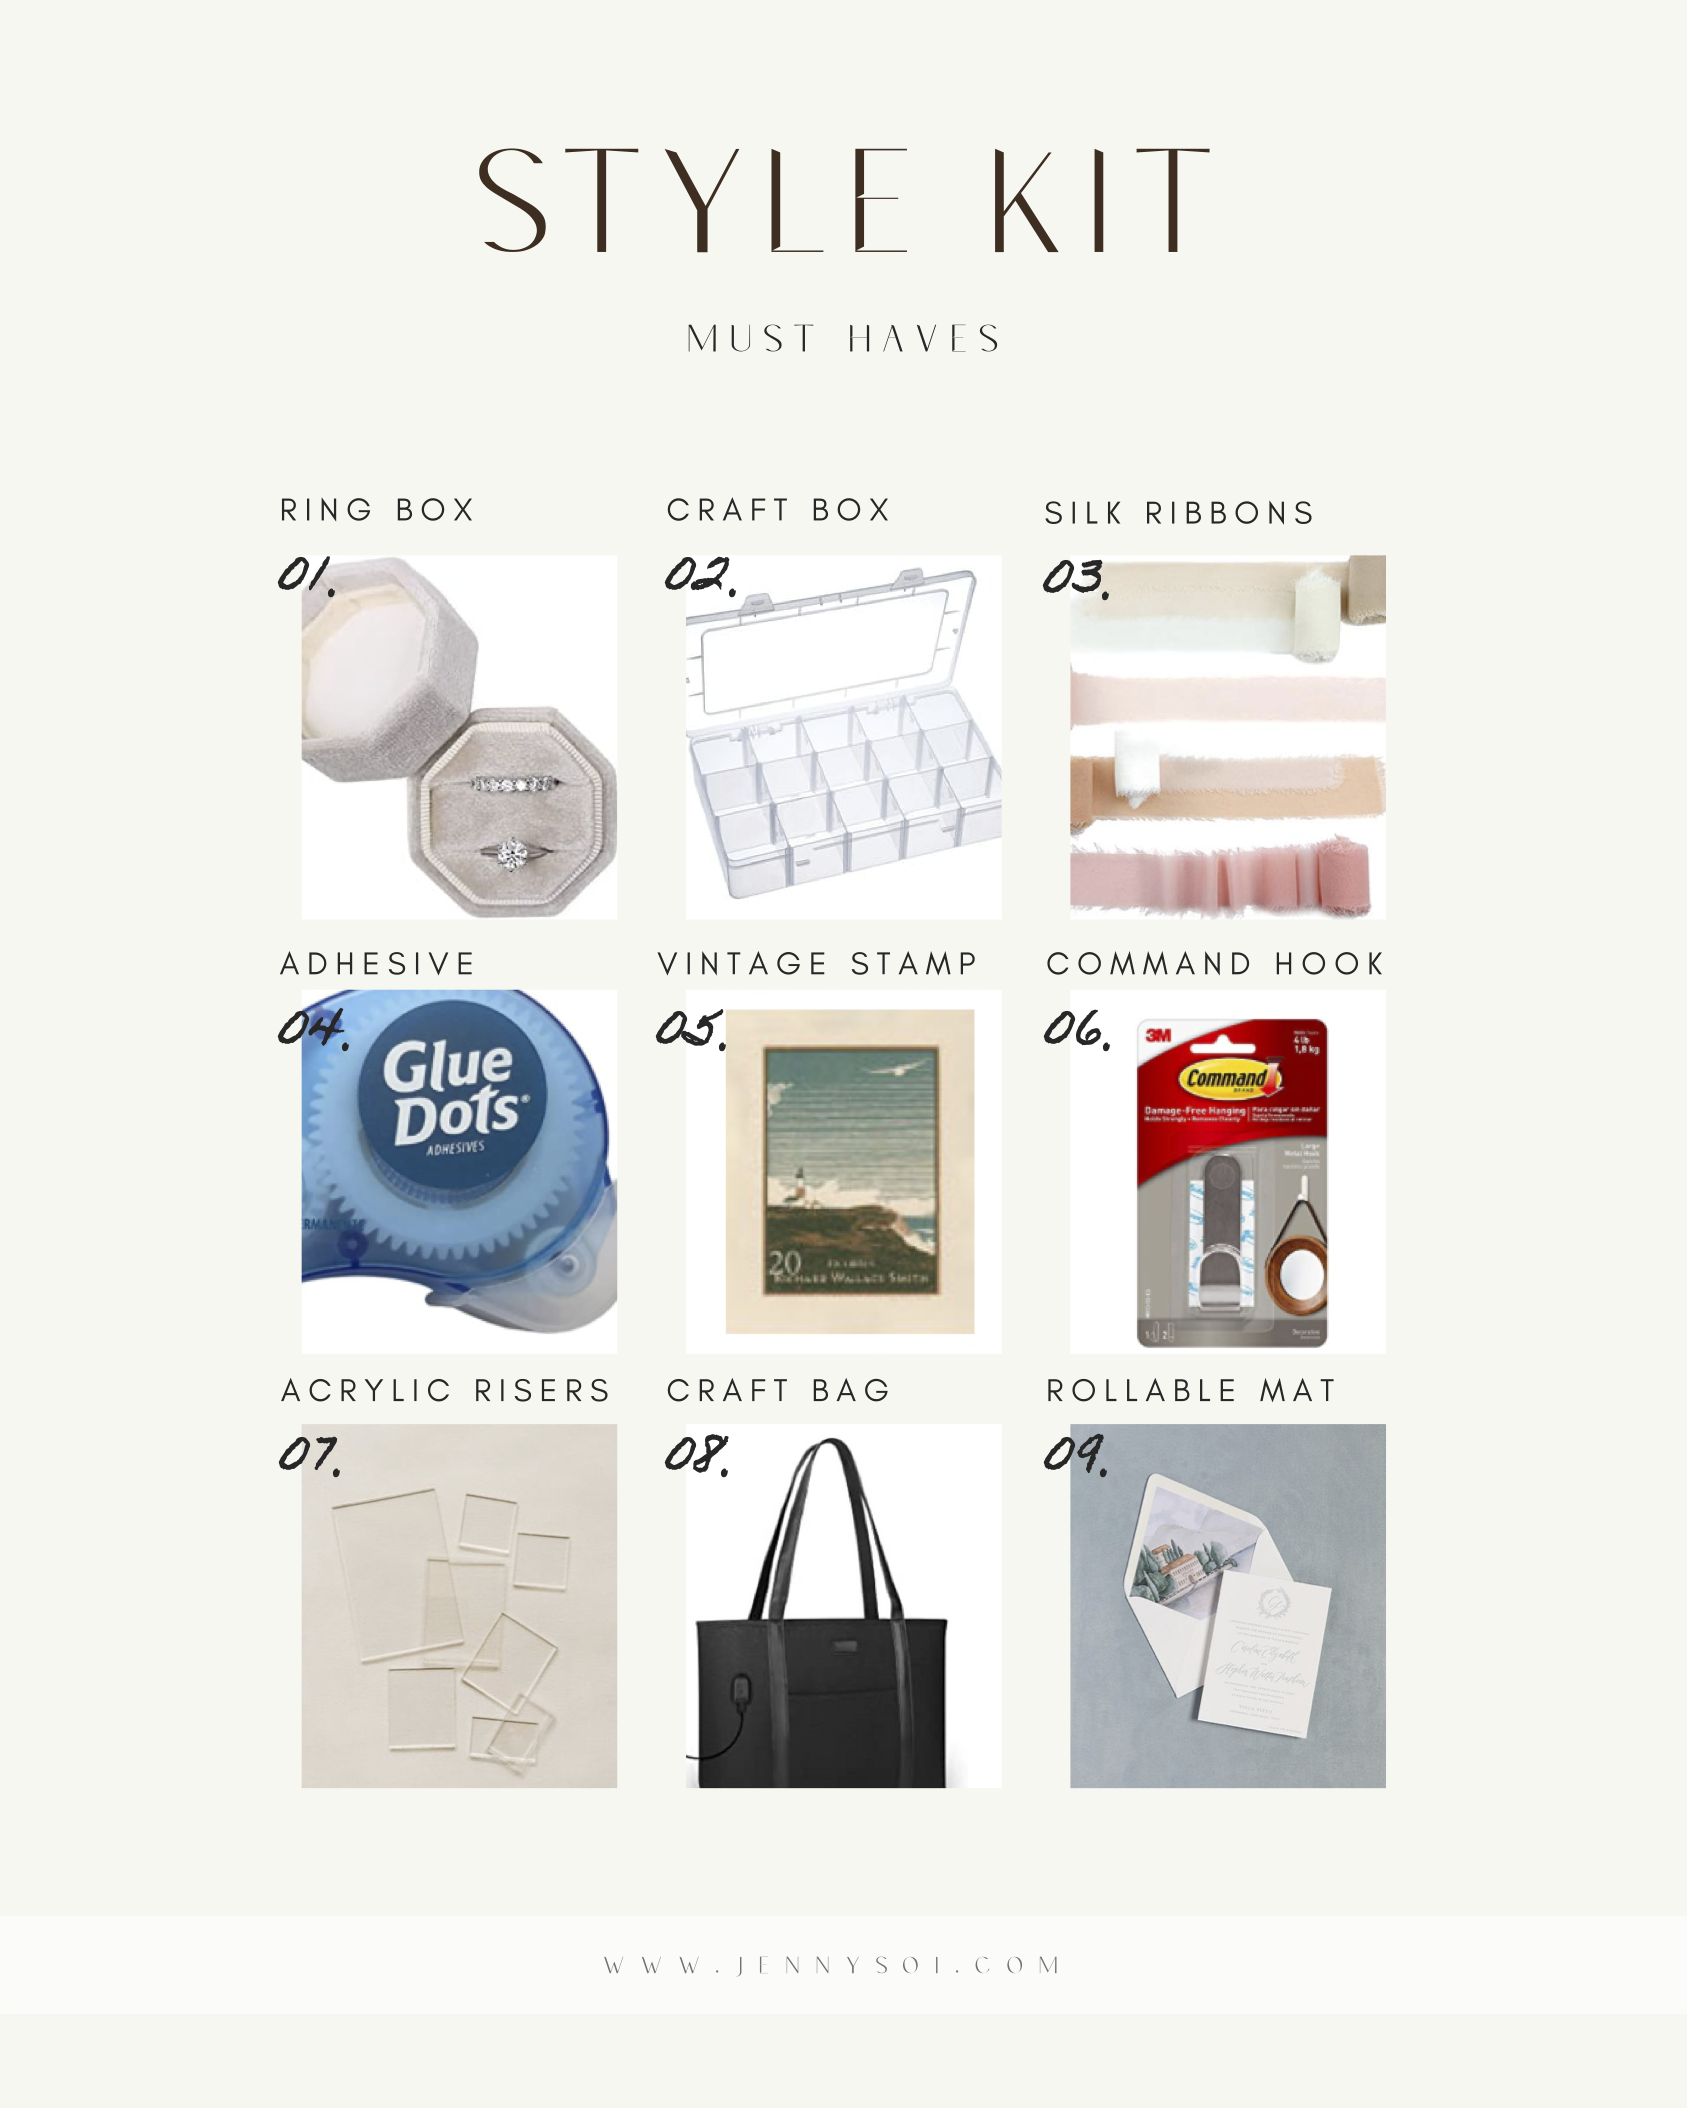 My Style Kit Must Haves